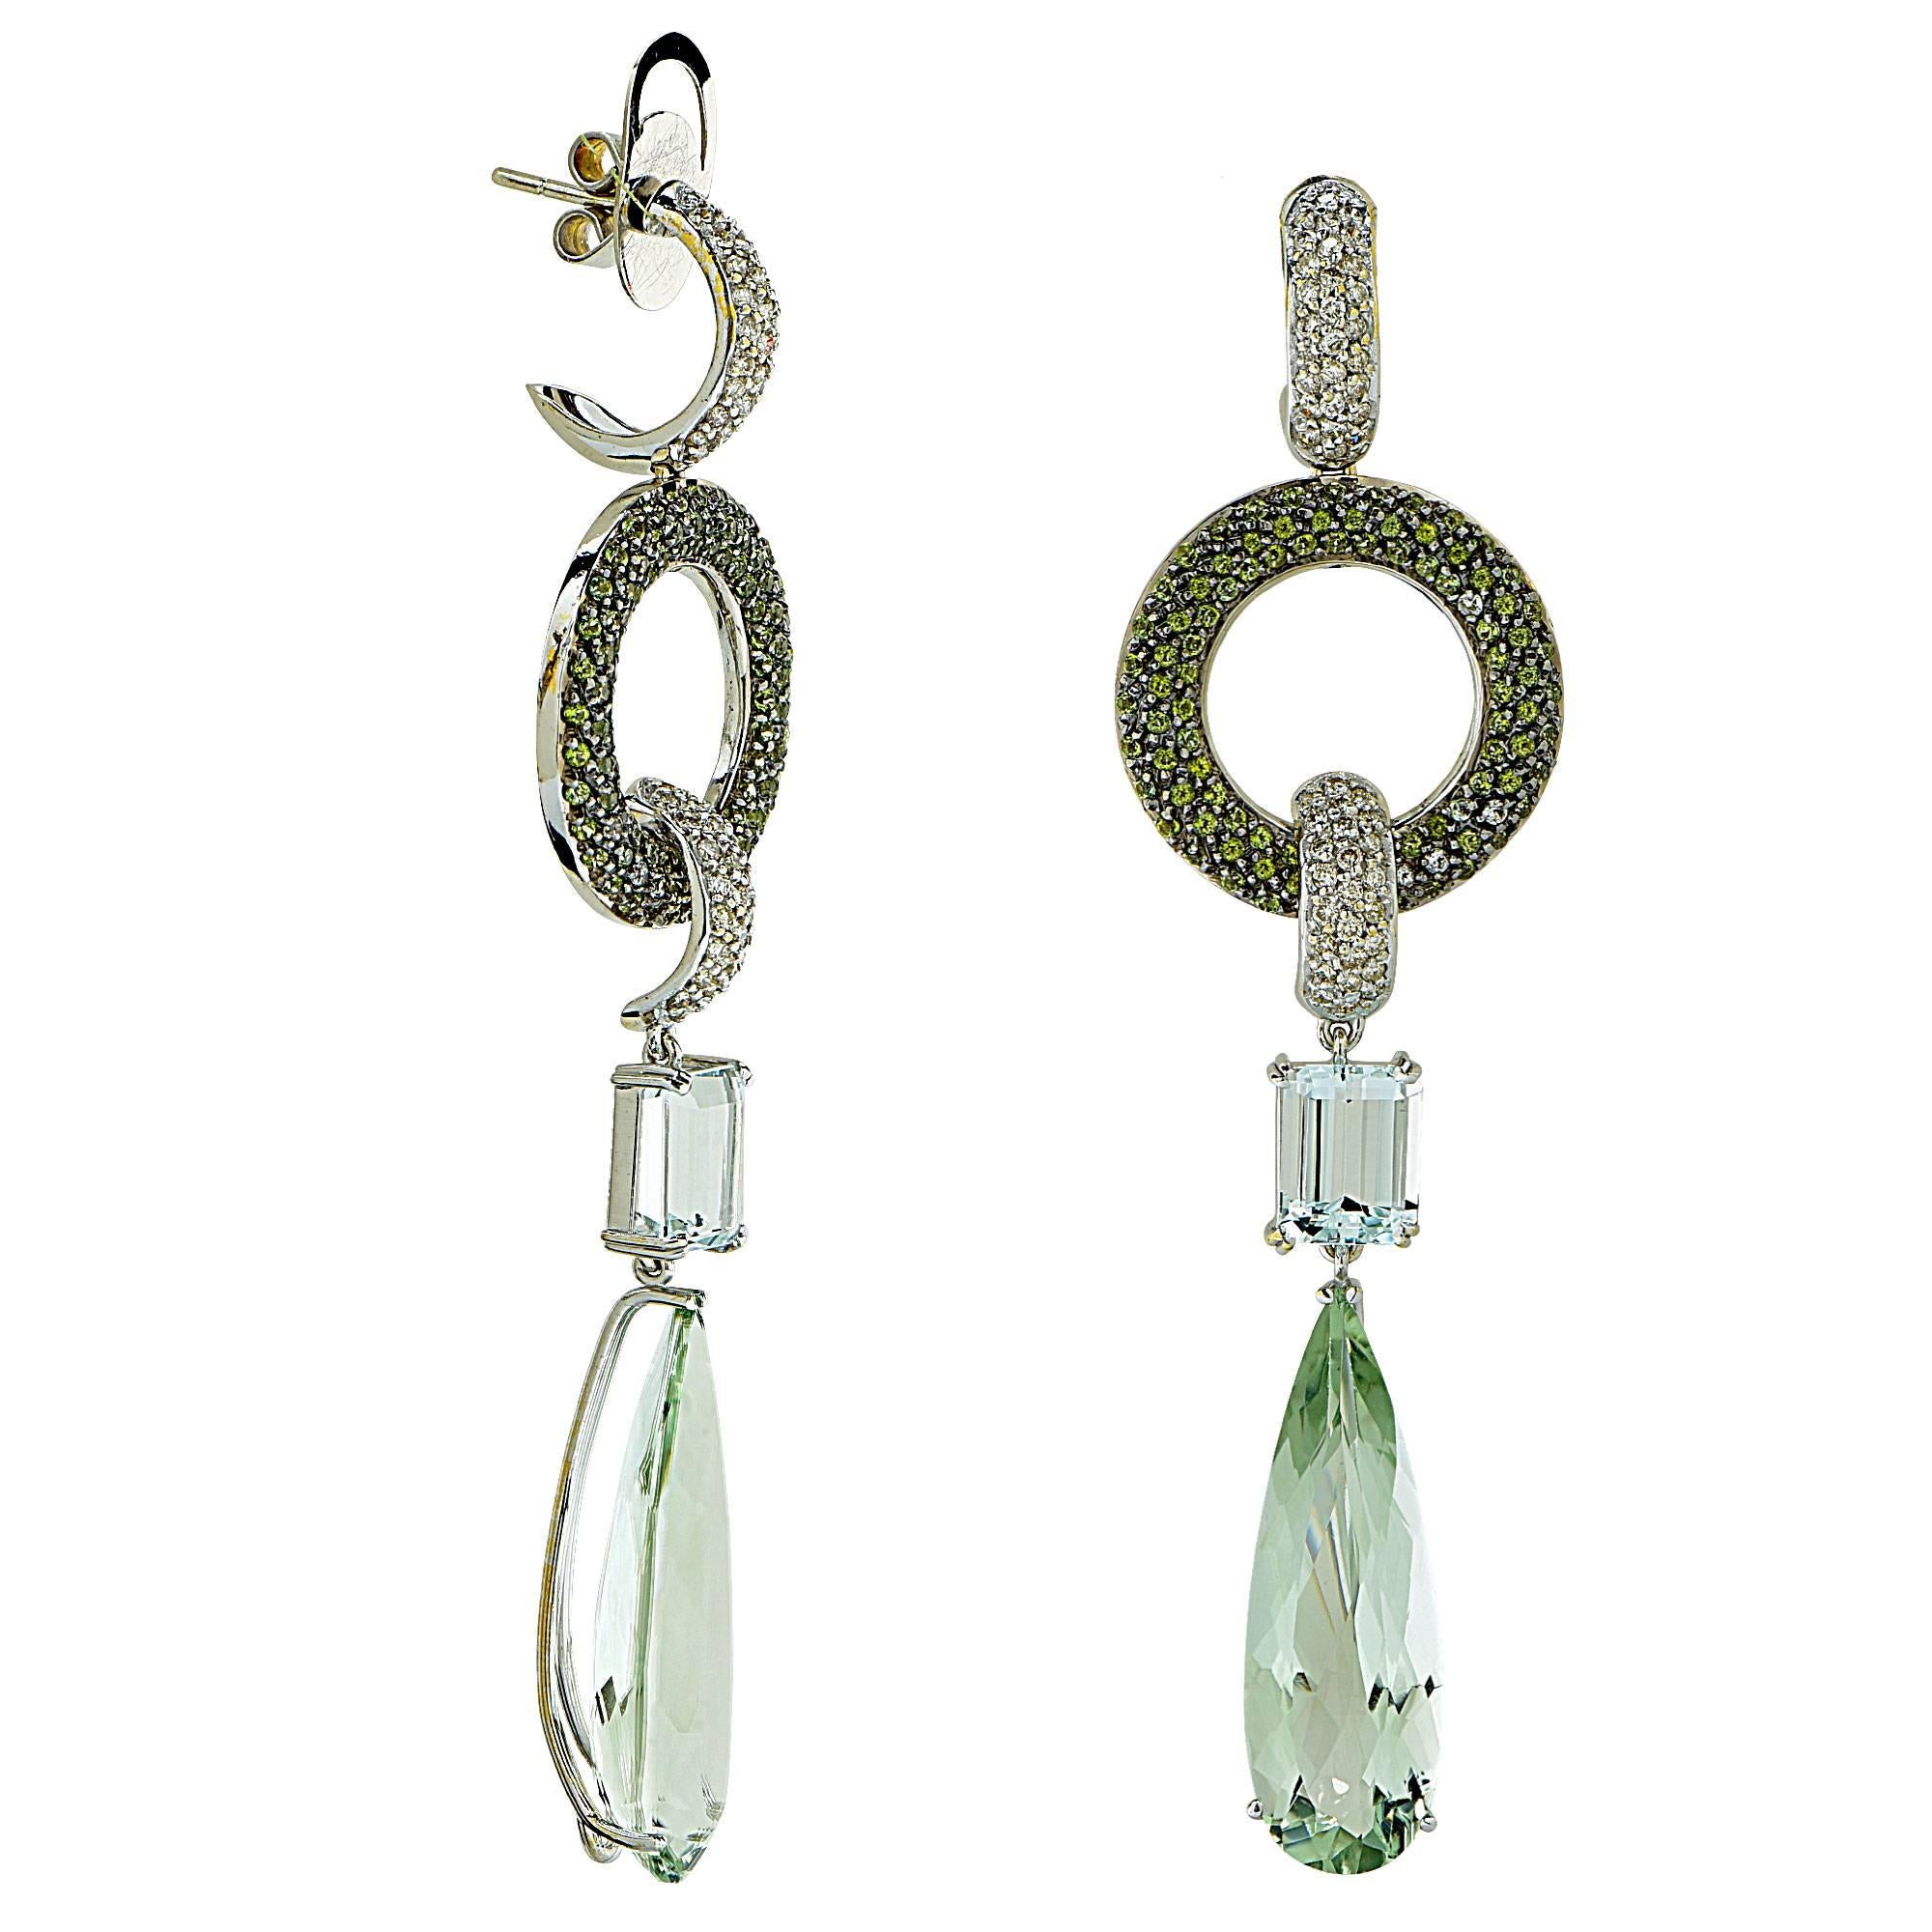 18k white gold earrings featuring 2 pear shape green quartz, 2 emerald cut aquamarines weighing approximately 5cts total, accented by approximately 1ct of round cut green quartz and 1ct of round brilliant cut diamonds H color SI clarity.

They are